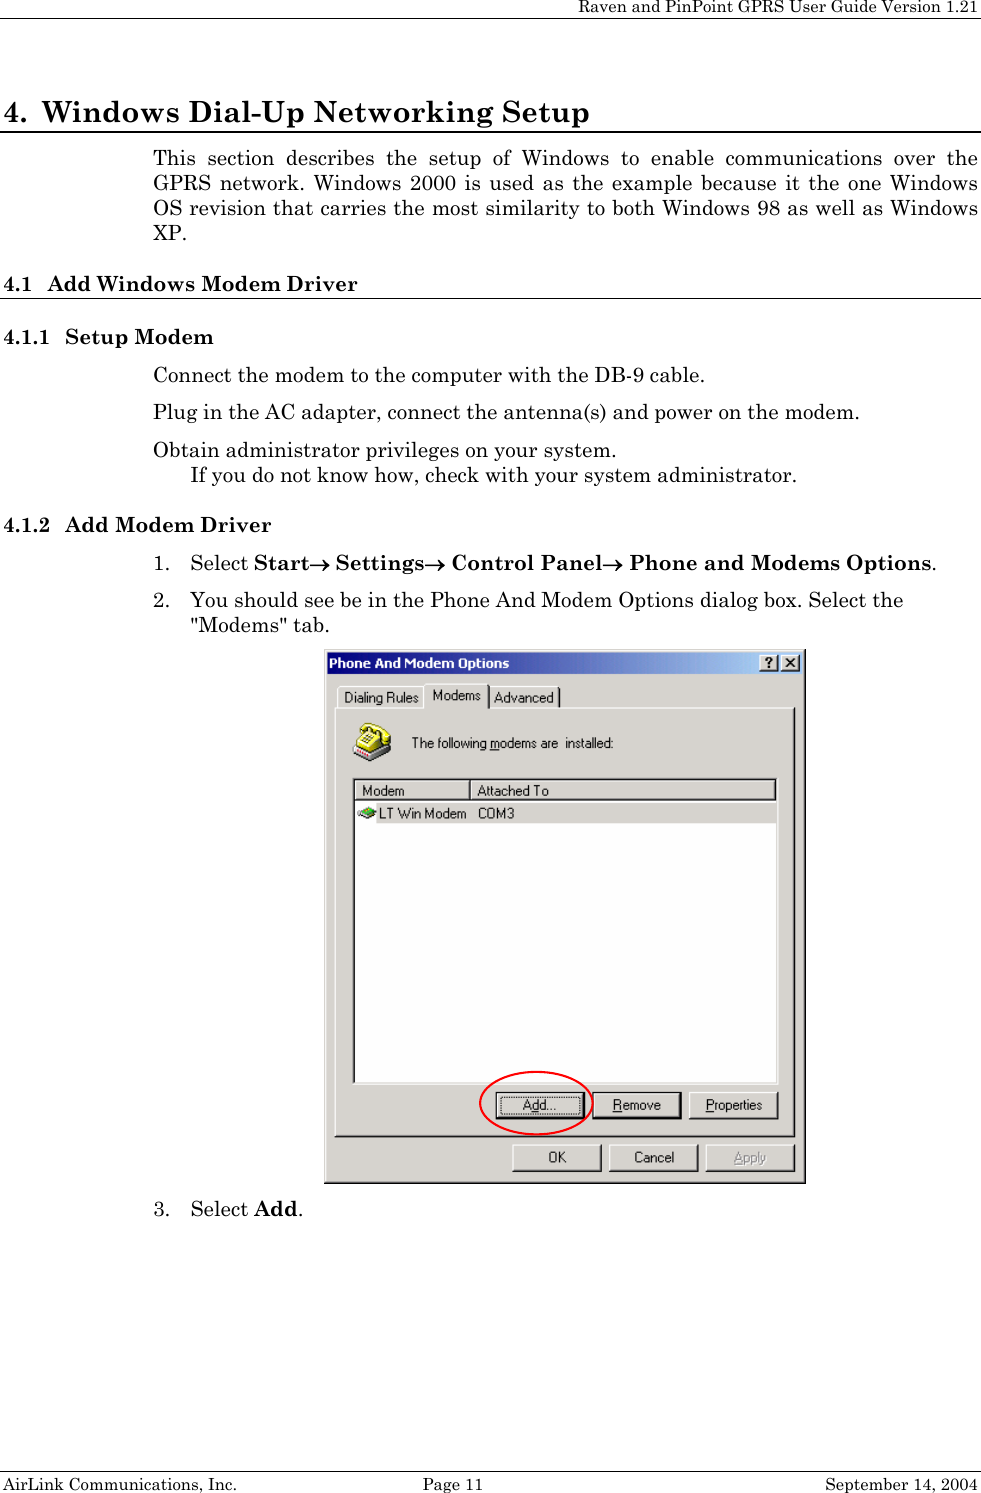 Raven and PinPoint GPRS User Guide Version 1.21 4. Windows Dial-Up Networking Setup This section describes the setup of Windows to enable communications over the GPRS network. Windows 2000 is used as the example because it the one Windows OS revision that carries the most similarity to both Windows 98 as well as Windows XP. 4.1 Add Windows Modem Driver 4.1.1 Setup Modem Connect the modem to the computer with the DB-9 cable. Plug in the AC adapter, connect the antenna(s) and power on the modem. Obtain administrator privileges on your system.  If you do not know how, check with your system administrator. 4.1.2 Add Modem Driver 1. Select Start→ Settings→ Control Panel→ Phone and Modems Options. 2. You should see be in the Phone And Modem Options dialog box. Select the &quot;Modems&quot; tab.  3. Select Add. AirLink Communications, Inc.  Page 11  September 14, 2004 